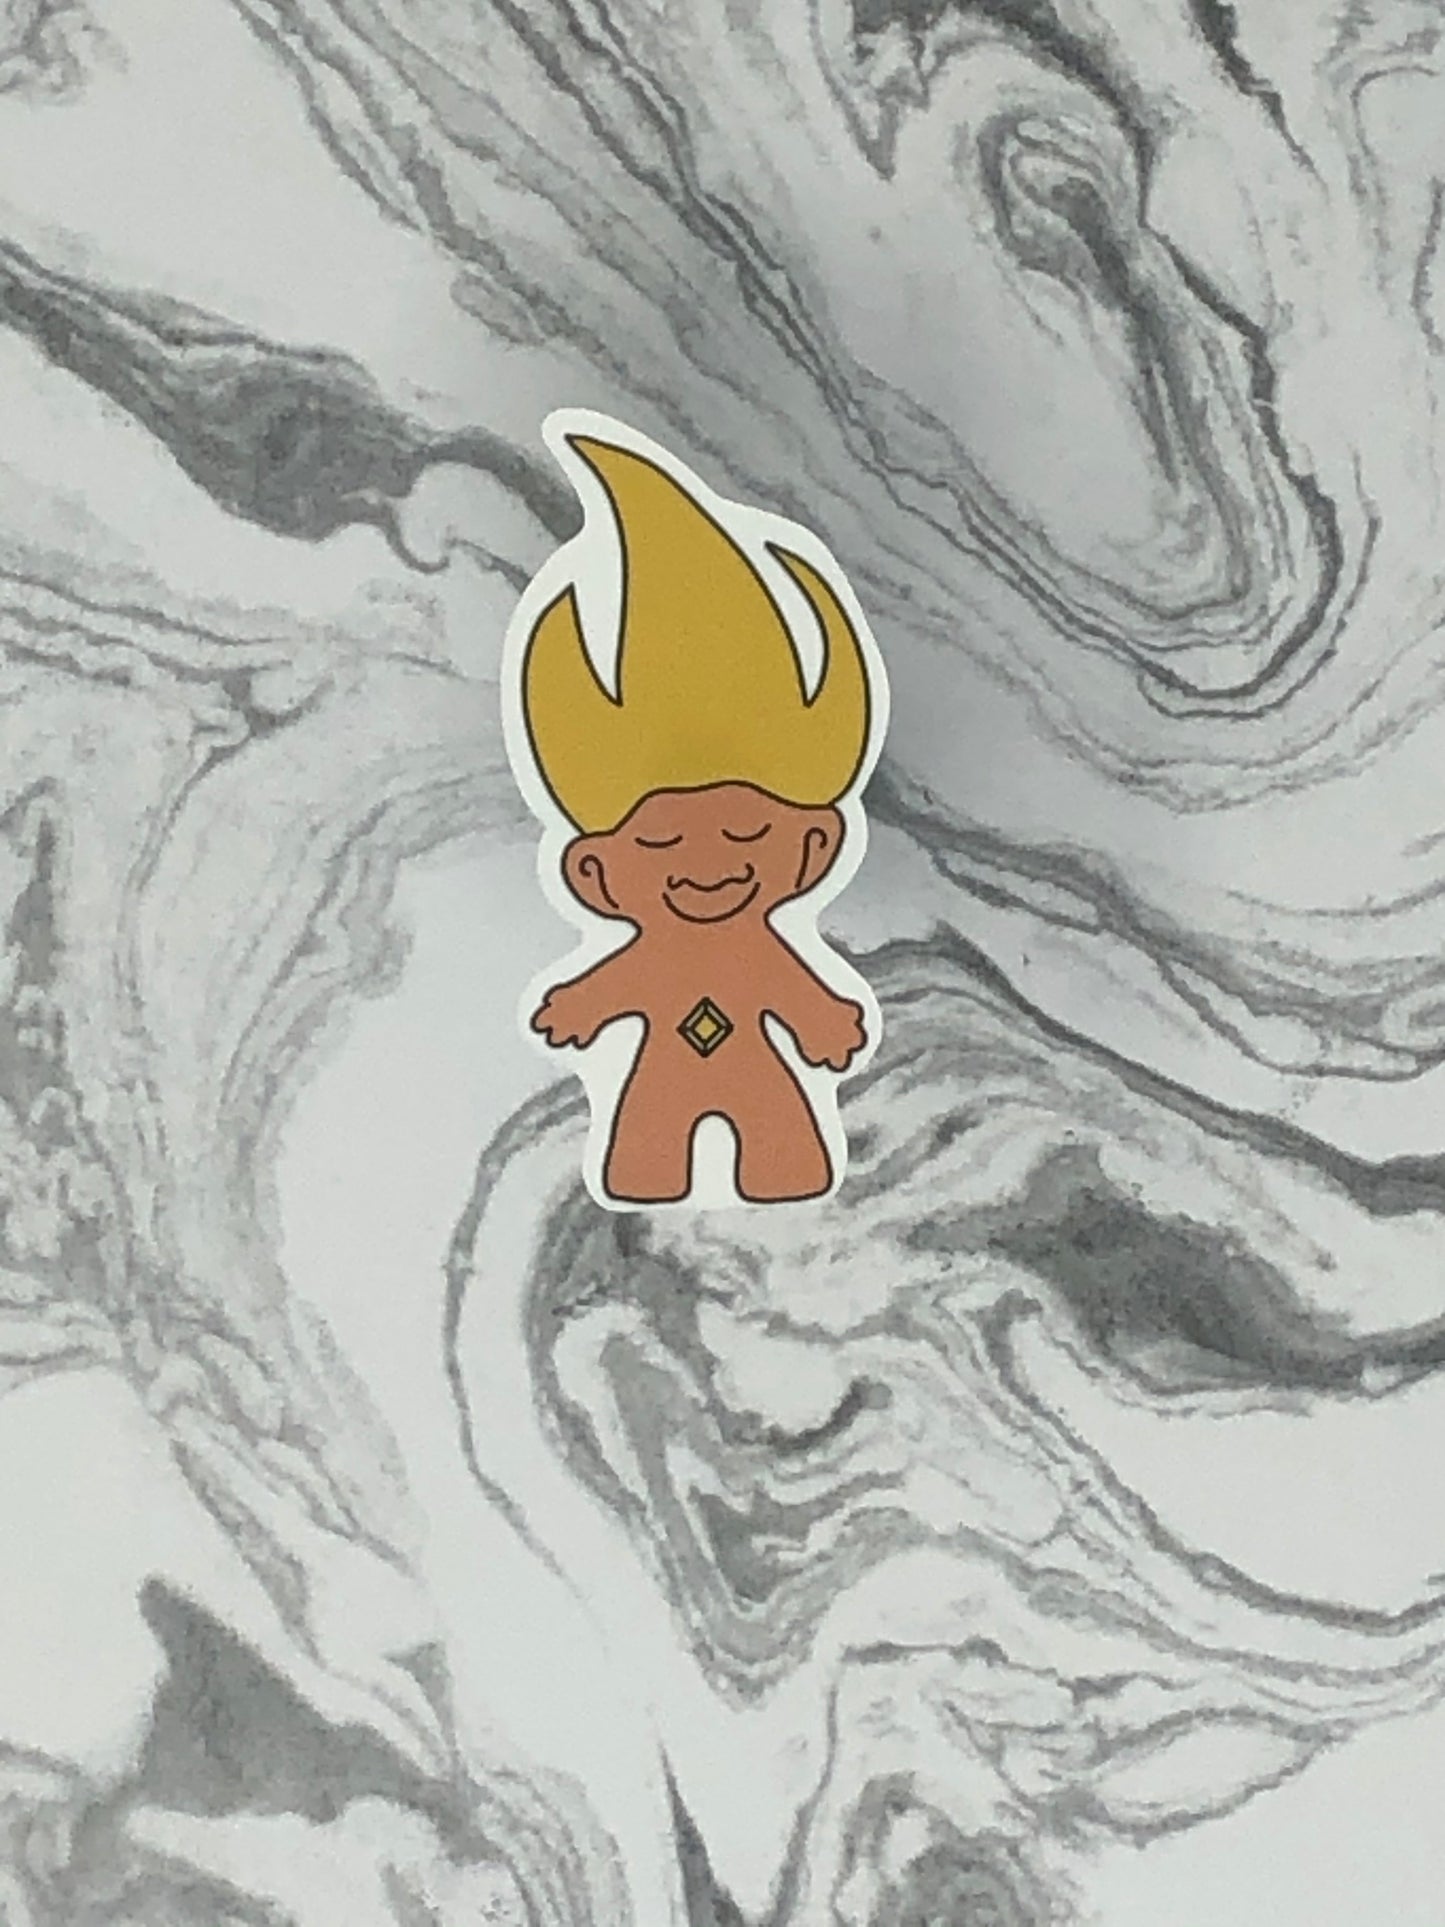 Troll Doll Stickers in a Variety of Colors